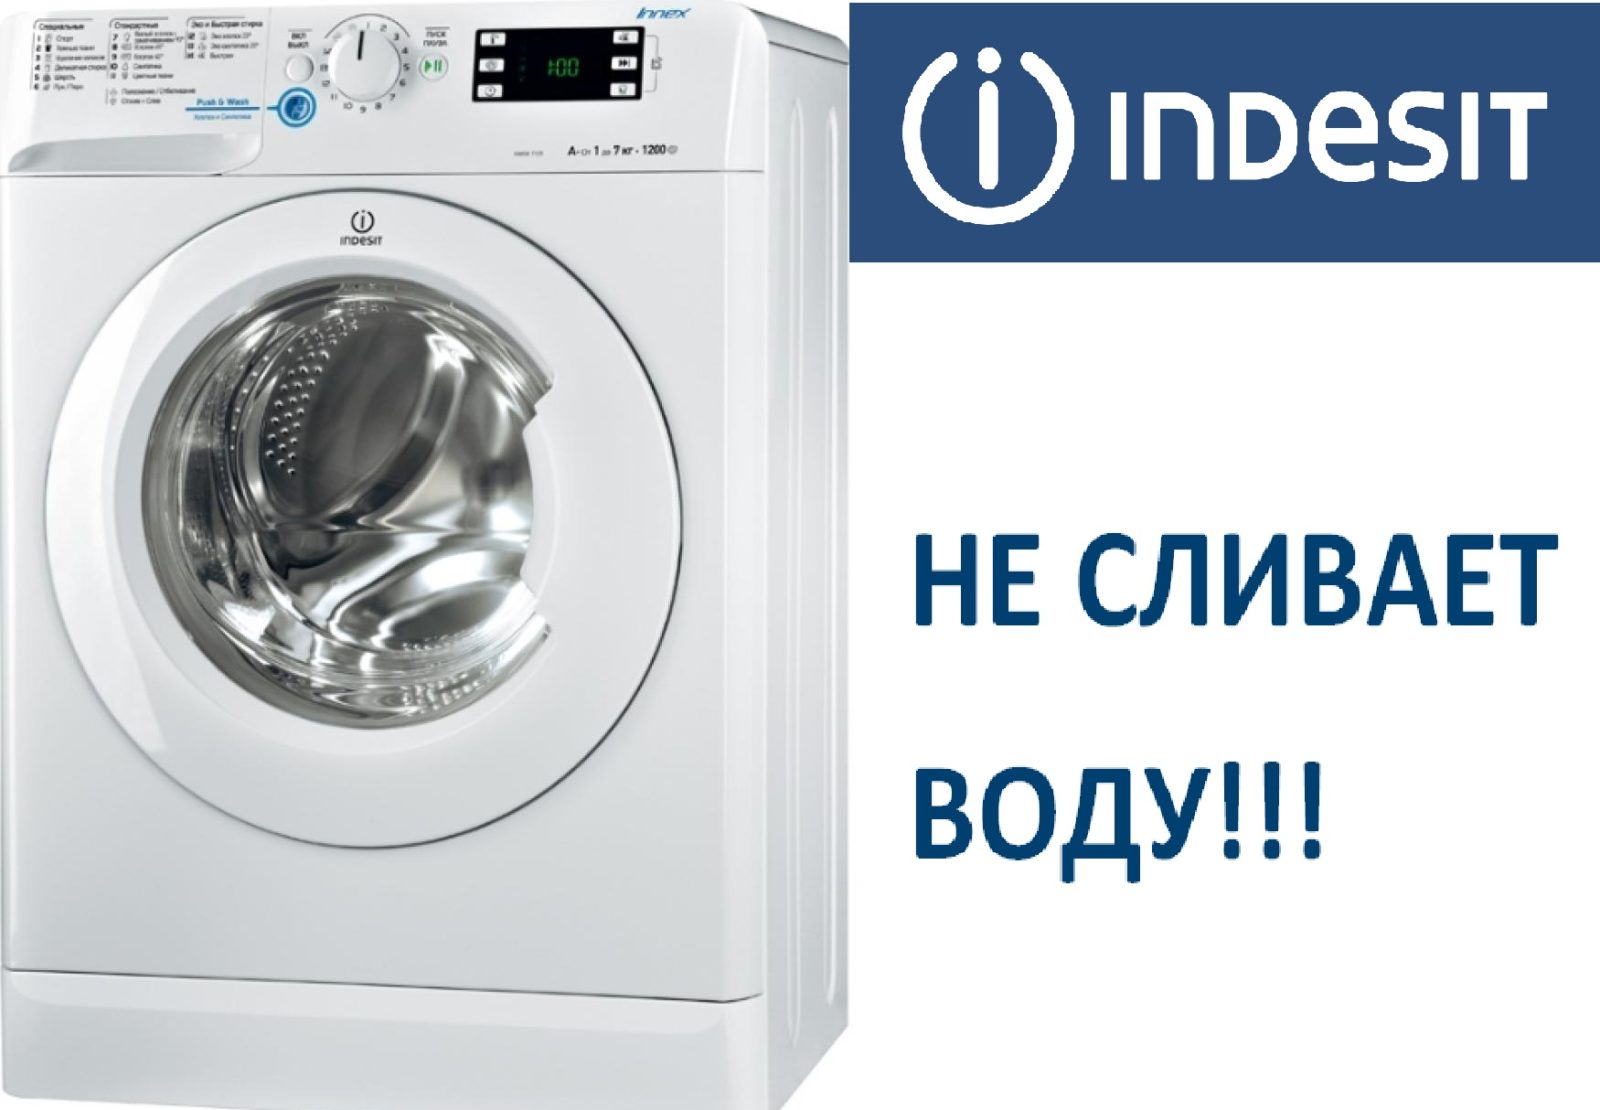 Indesit machine does not drain water